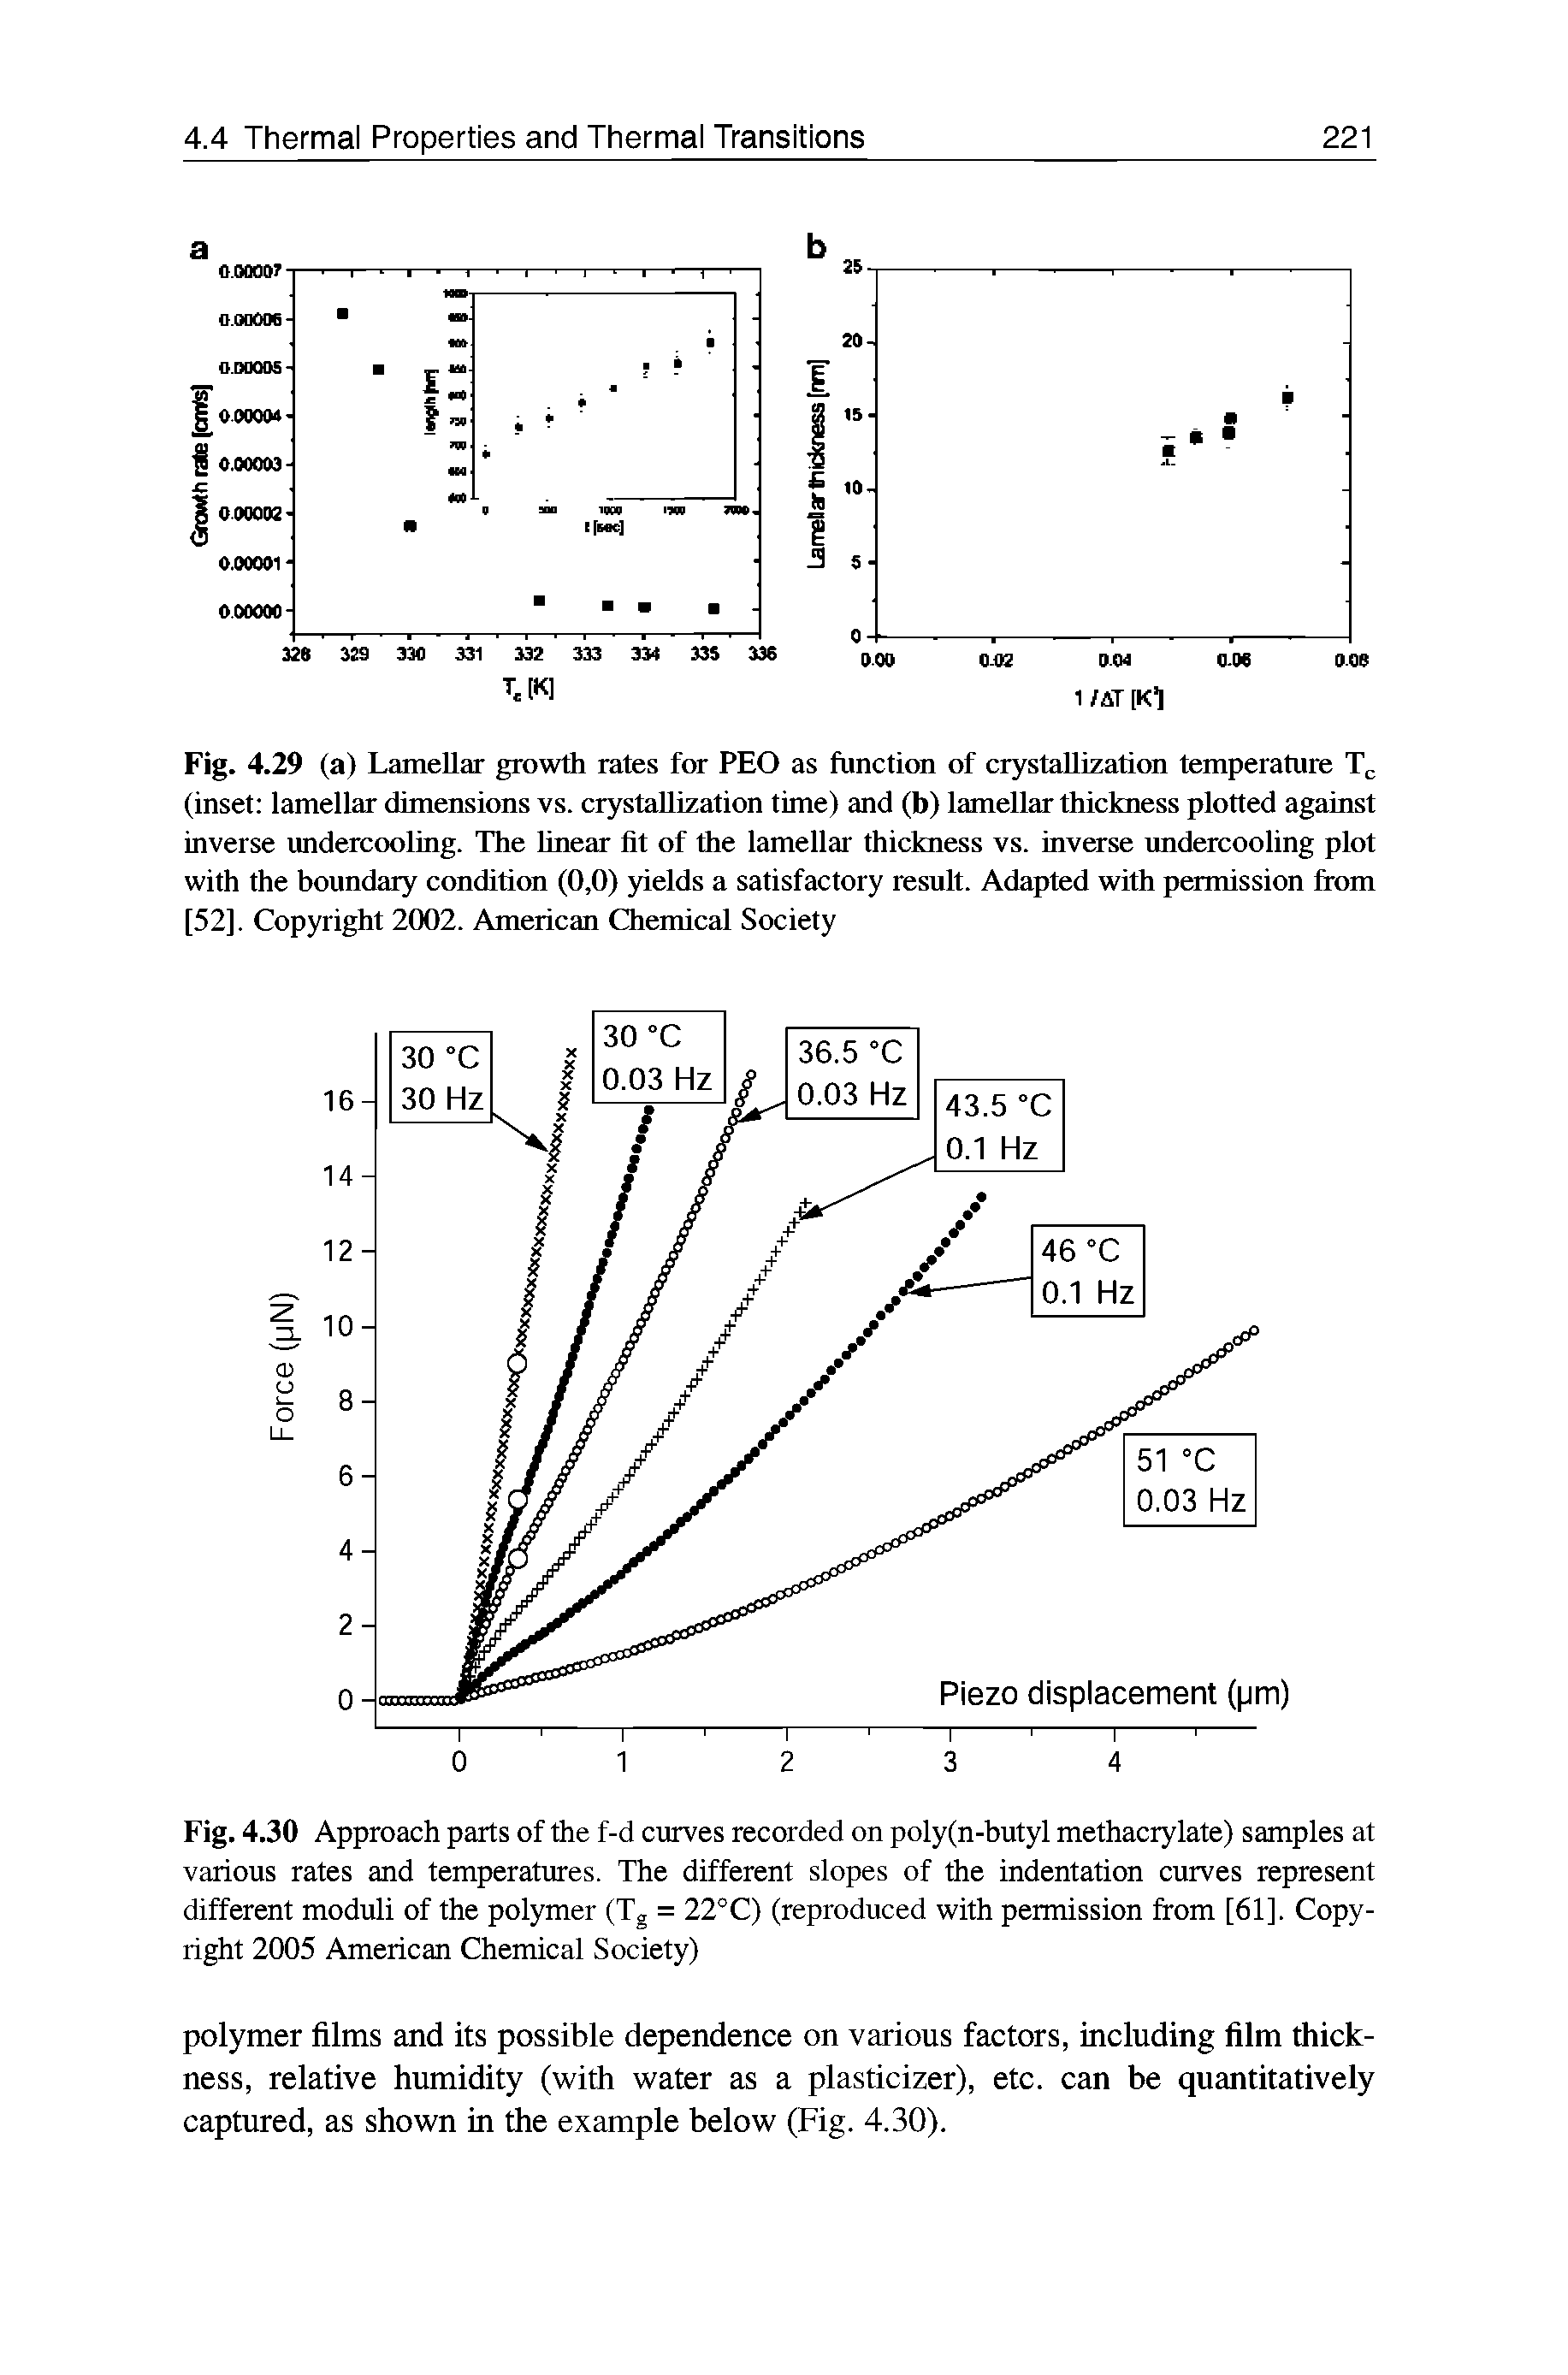 Fig. 4.30 Approach parts of the f-d curves recorded on poly(n-butyl methacrylate) samples at various rates and temperatures. The different slopes of the indentation curves represent different moduli of the polymer (Tg = 22°C) (reproduced with permission from [61]. Copyright 2005 American Chemical Society)...